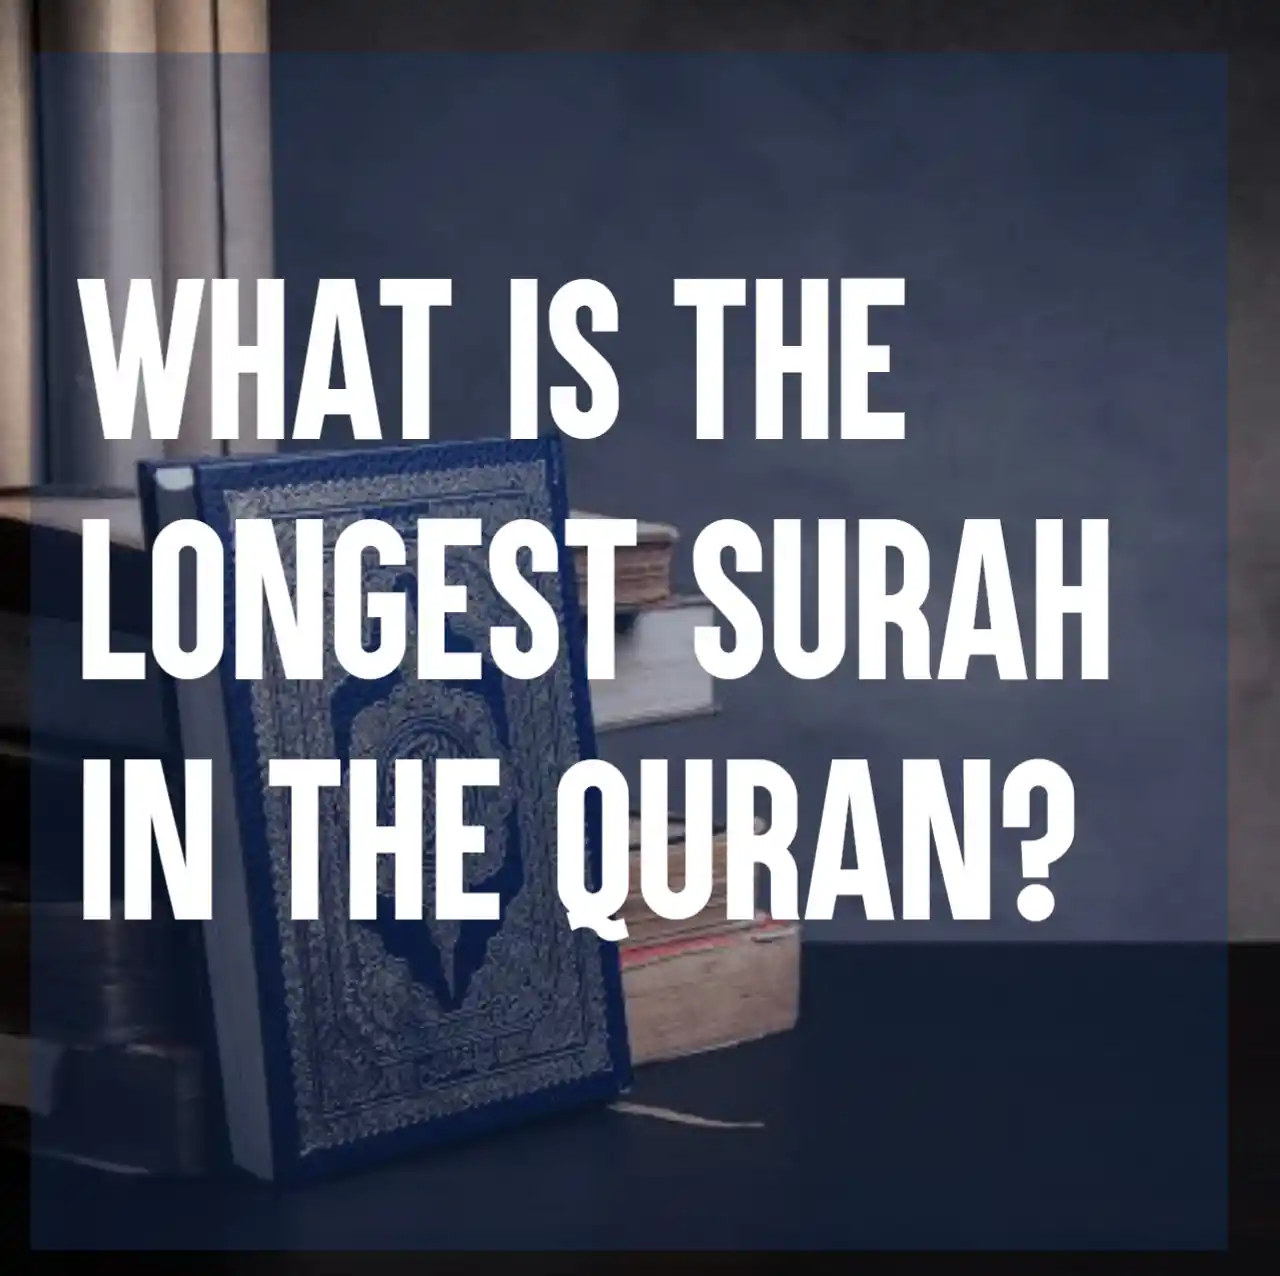 What is the longest surah in the Quran